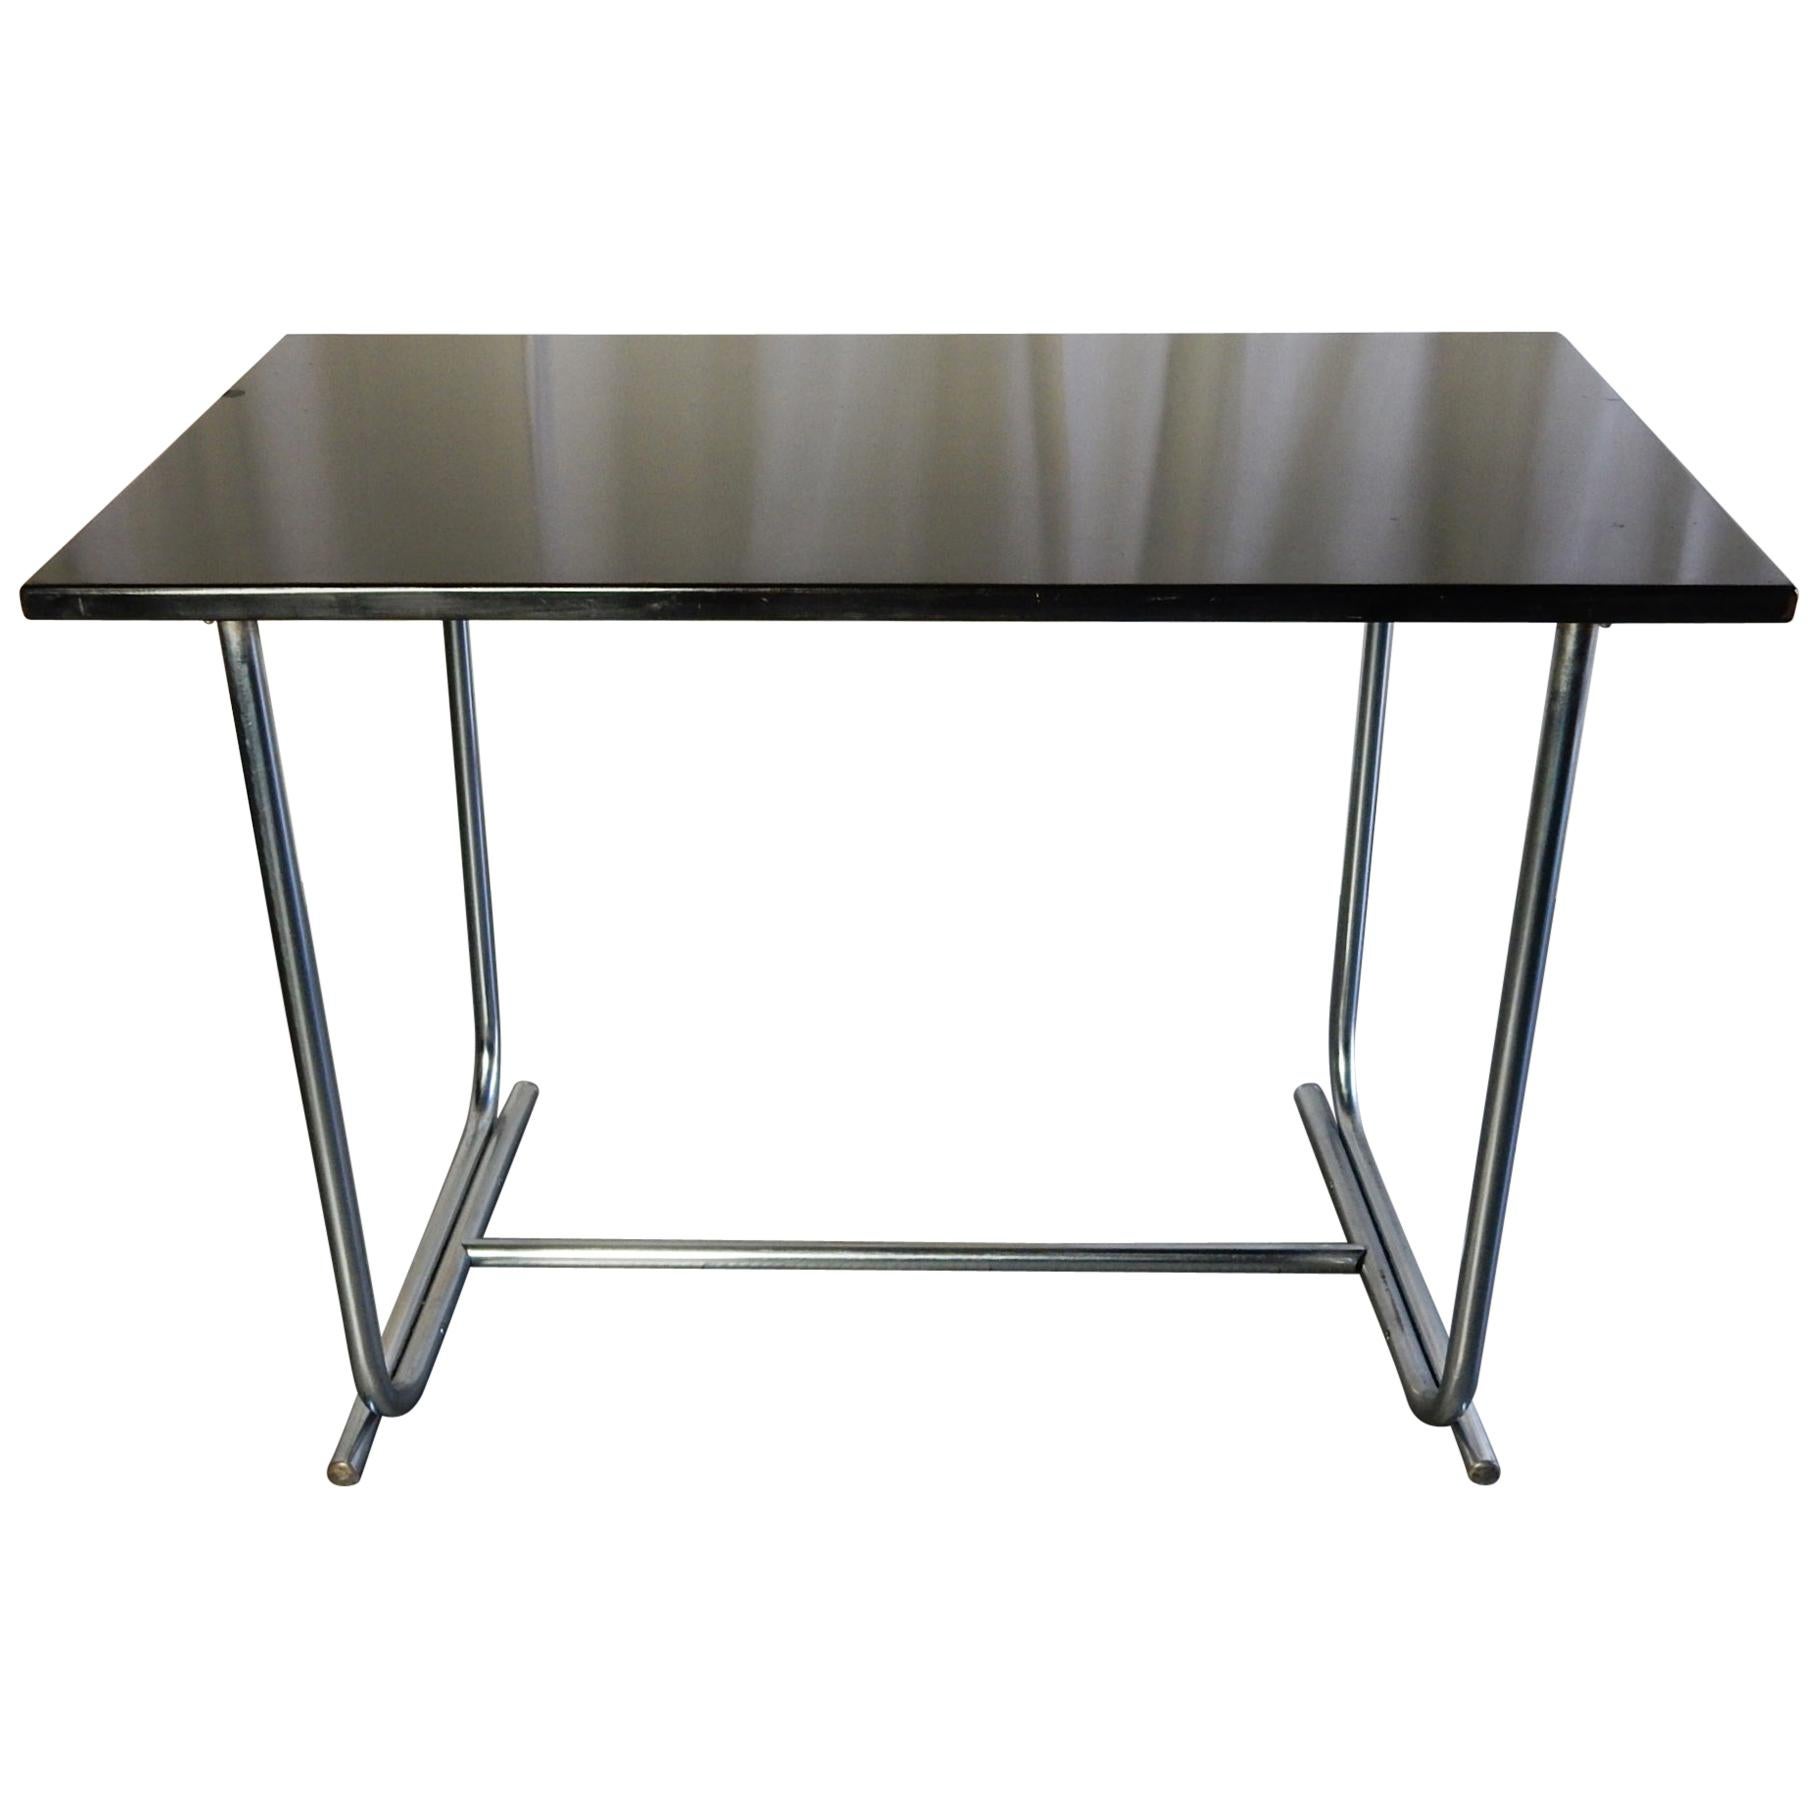 Art Deco Table Desk by Wolfgang Hoffmann for Howell  No.475 